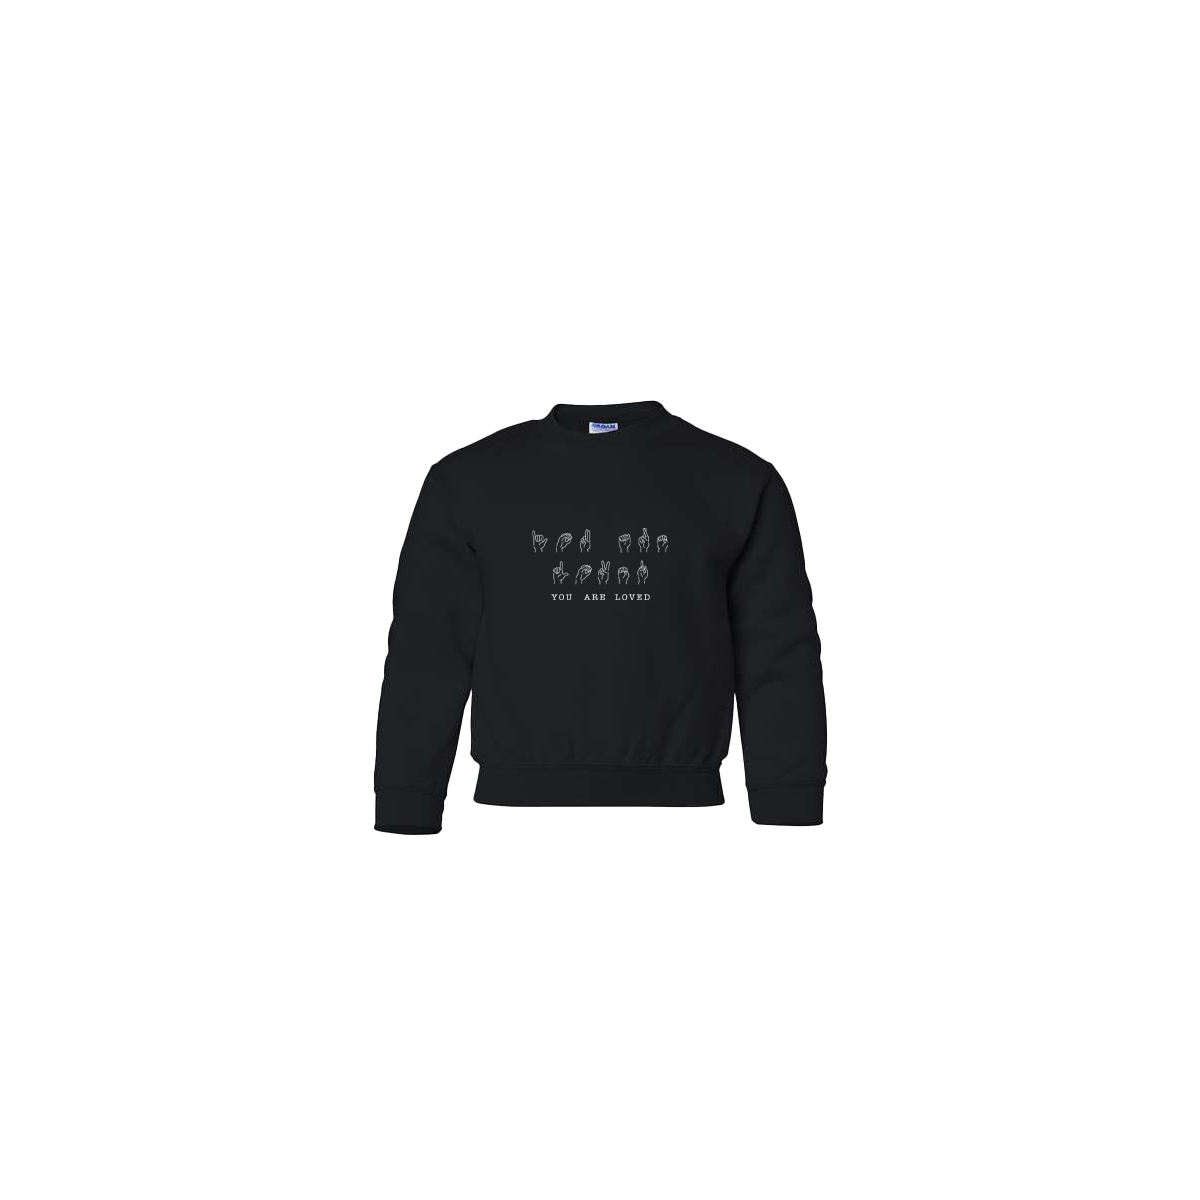 You Are Loved Sign Language Embroidered Black Youth Crewneck